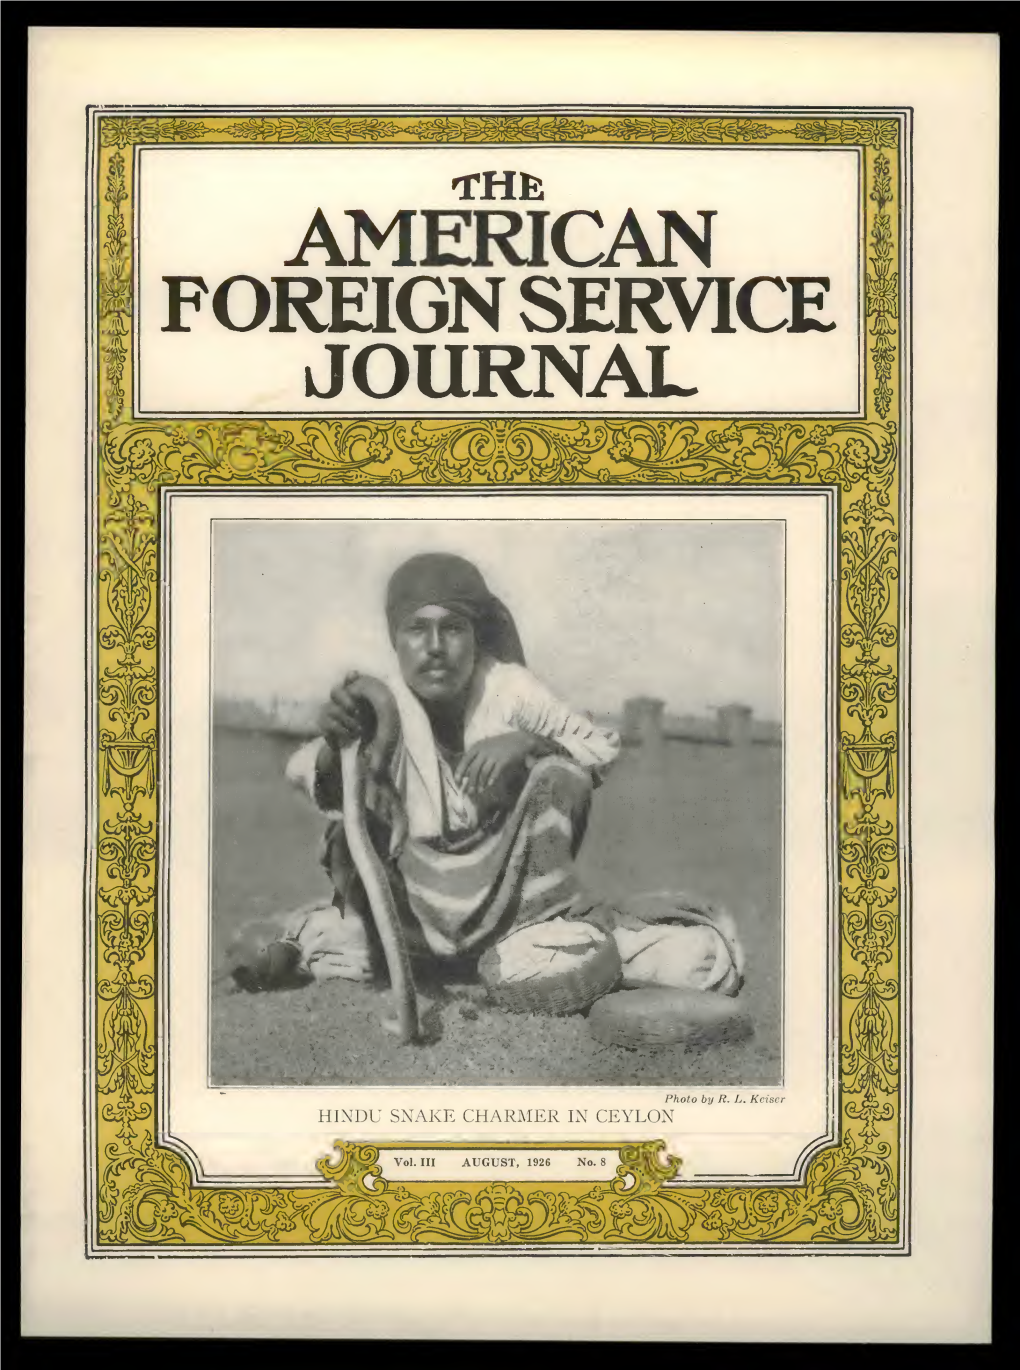 The Foreign Service Journal, August 1926